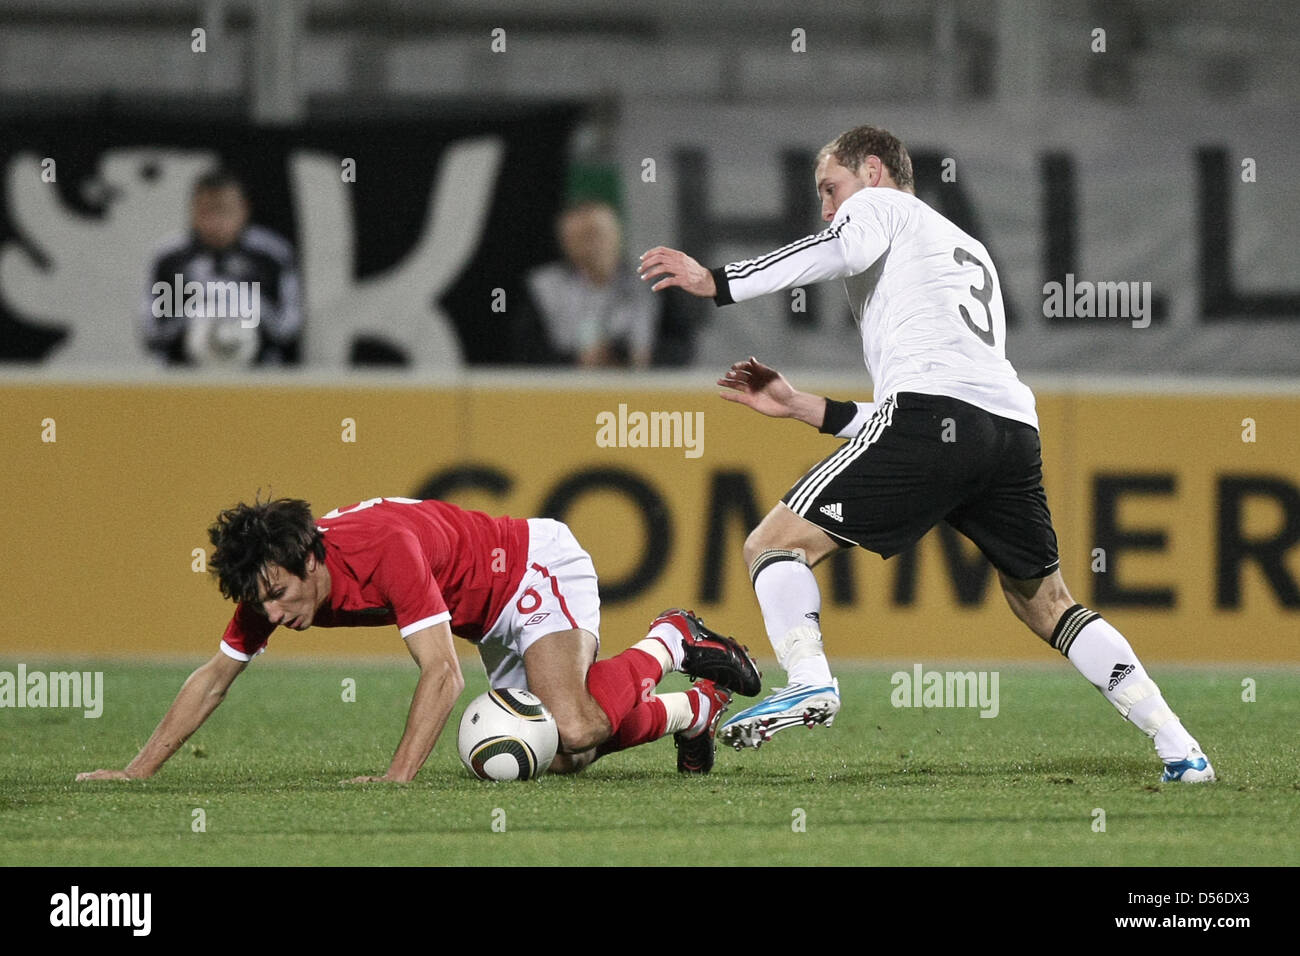 Germany's Konstantin Rausch (R) and England's Jack Cork vie for the ball during the U-21 international match Germany vs. England at the Brita-Arena in Wiesbaden, Germany, 16 November 2010. Photo: Fredrik von Erichsen Stock Photo